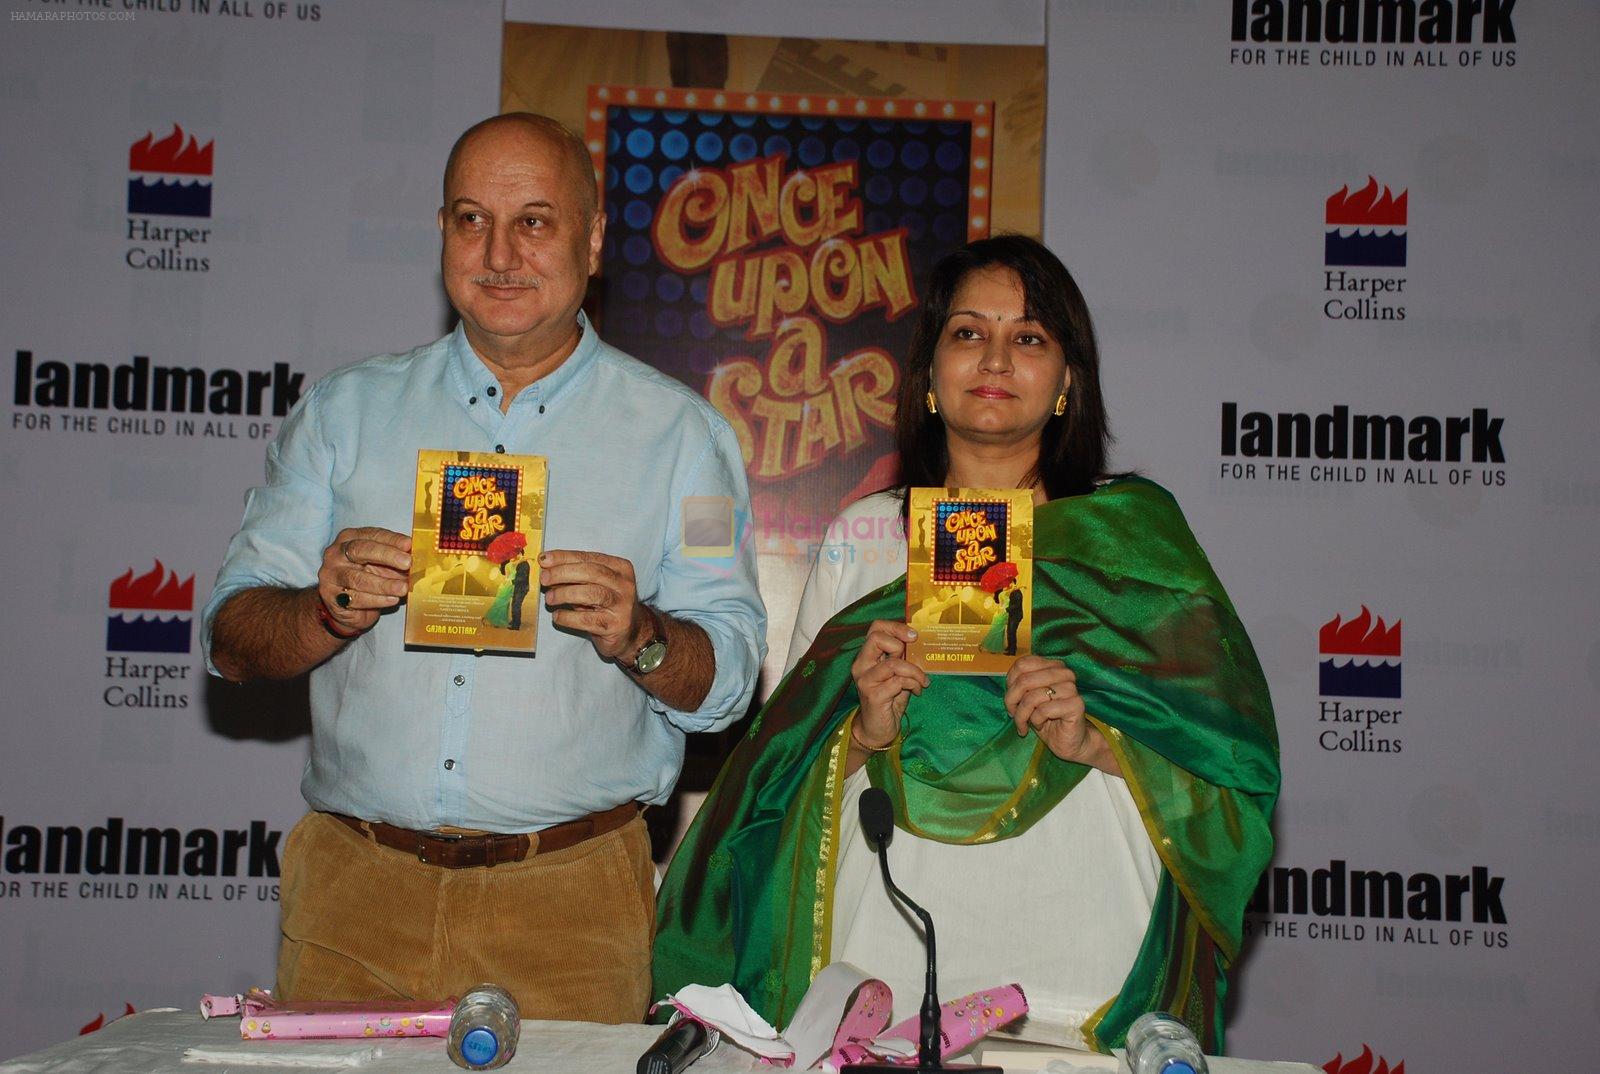 Anupam Kher launches Once Upn a star book in Mumbai on 16th Dec 2014